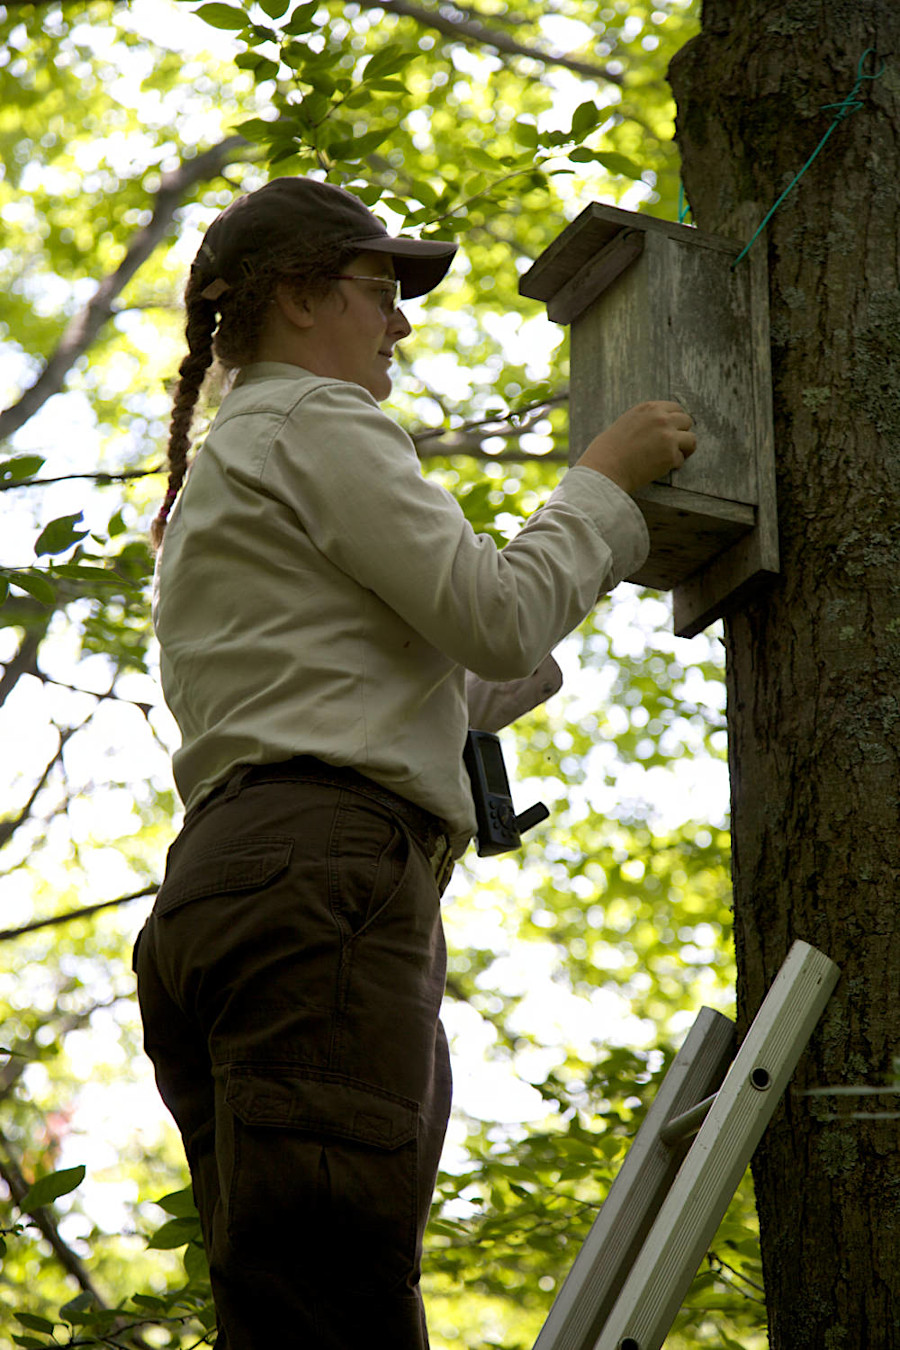 providing nest boxes also helped increase the number of Virginia northern flying squirrels